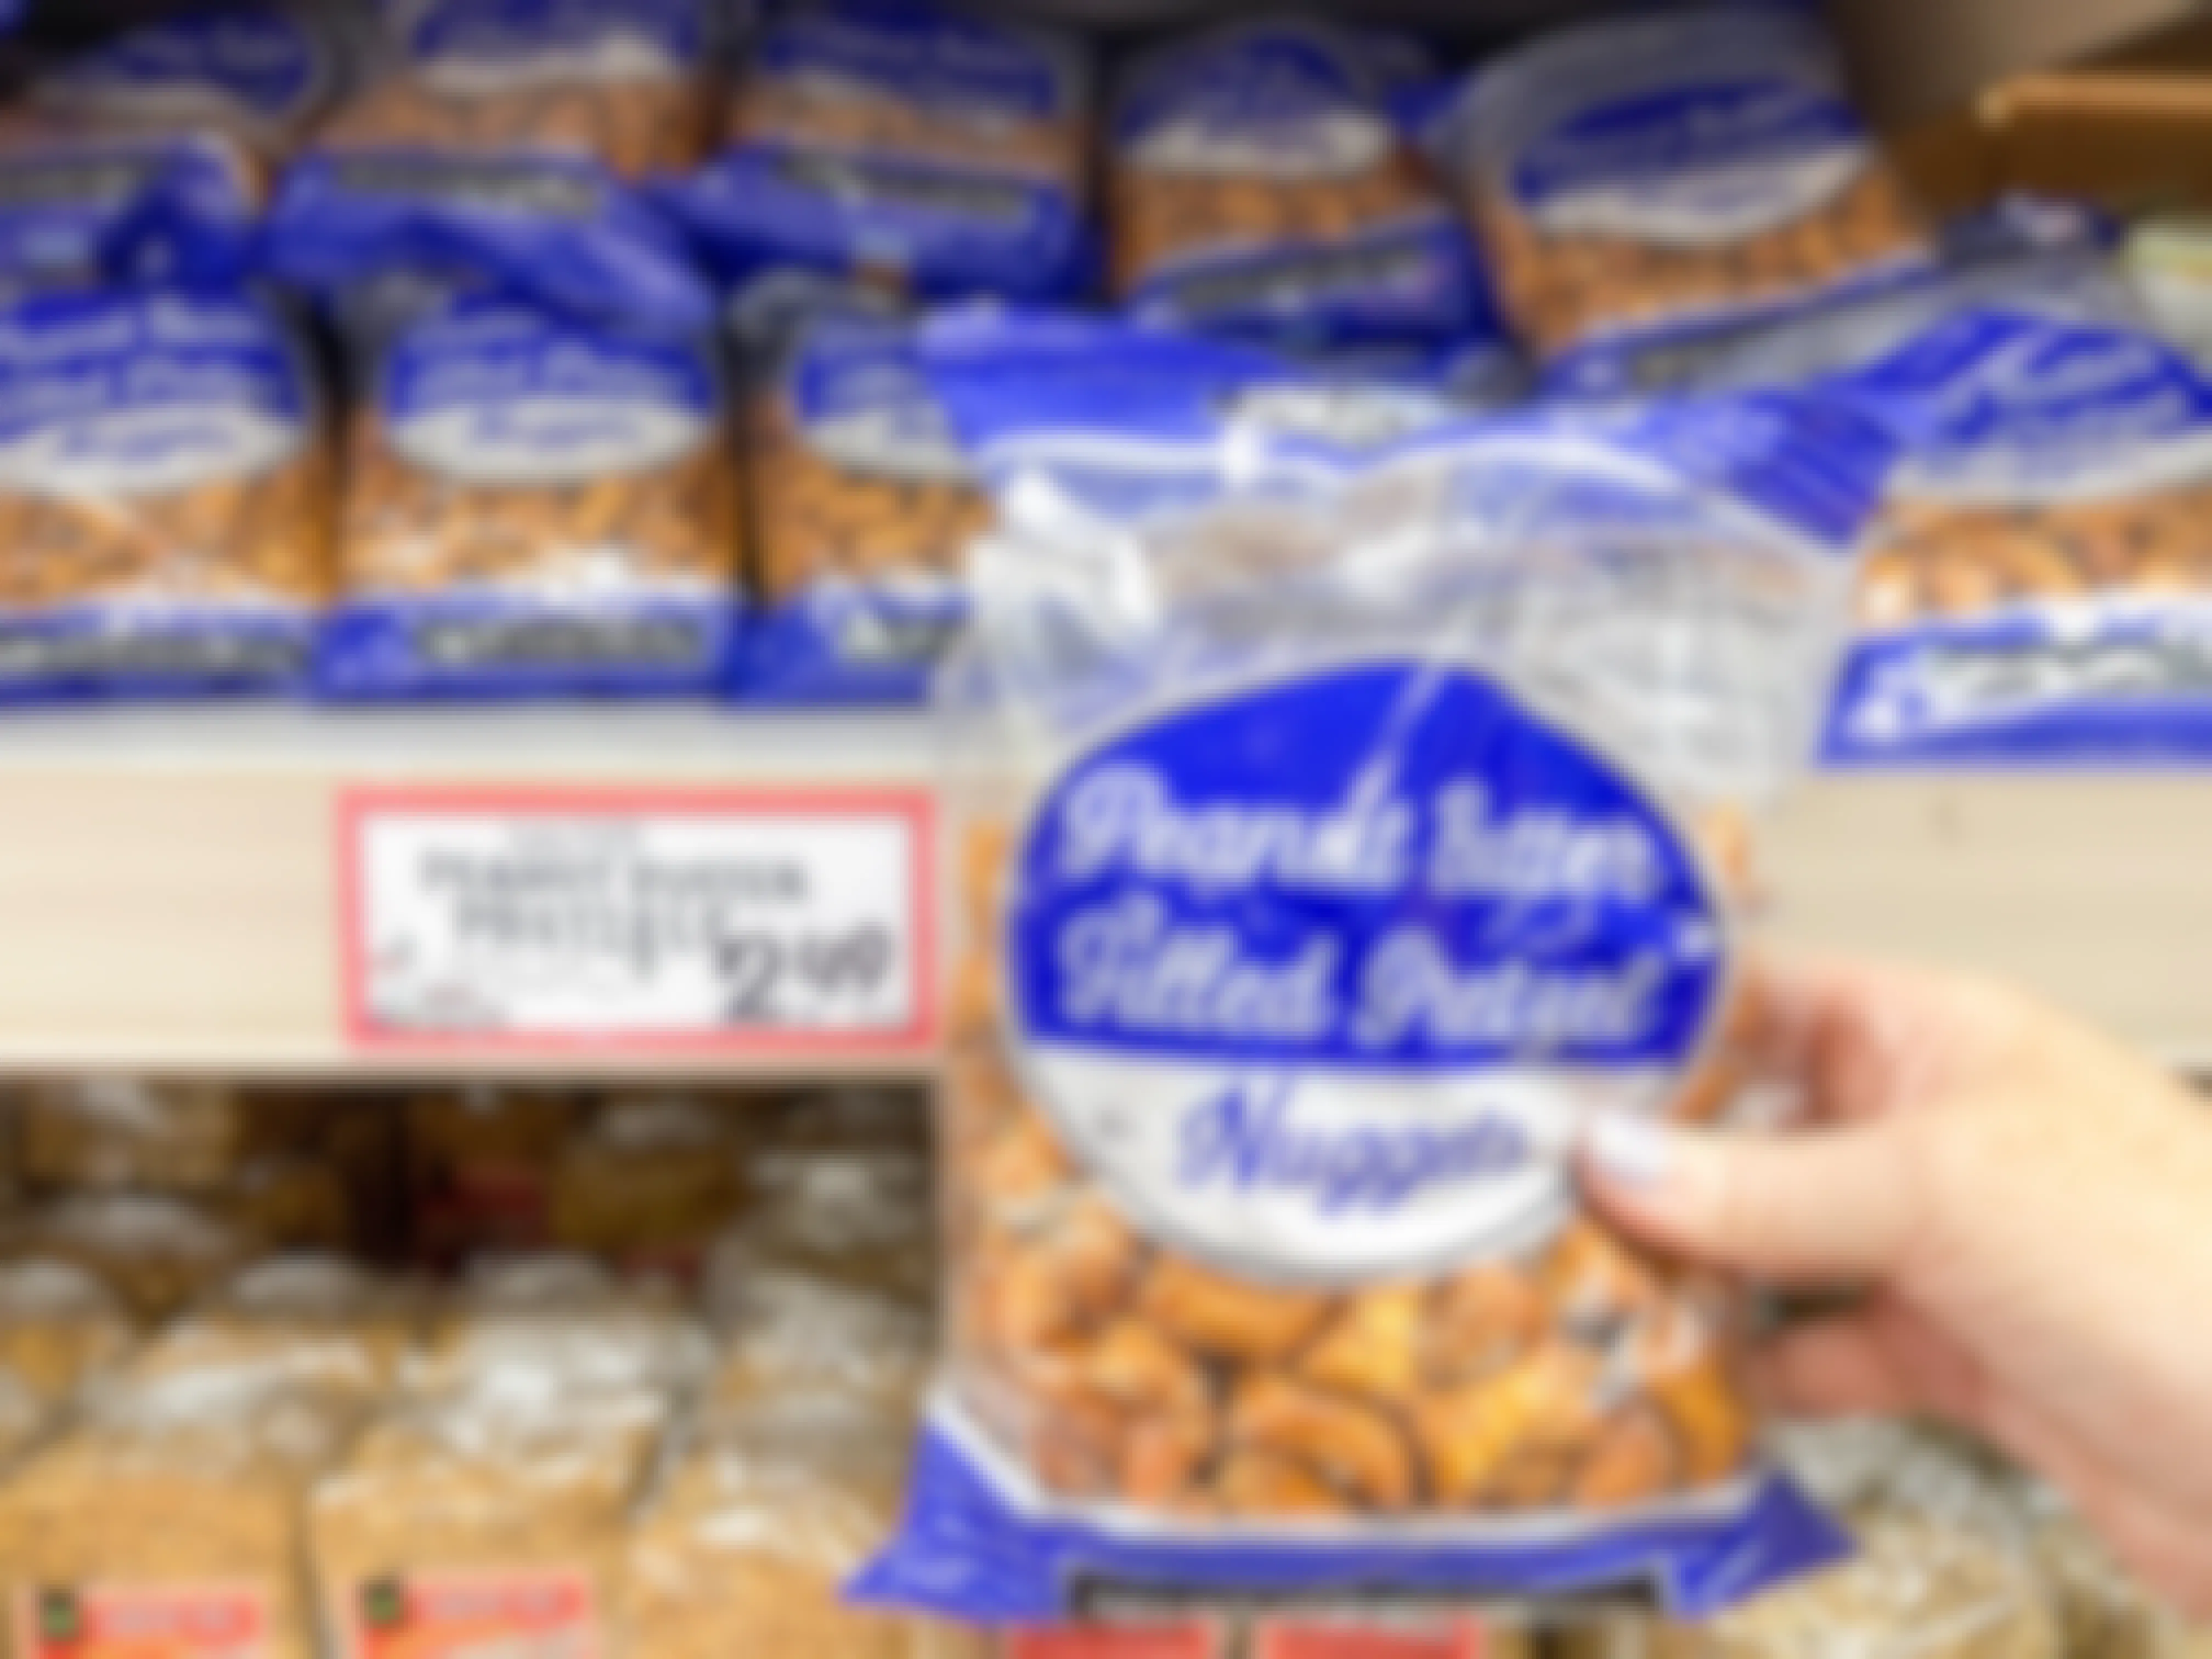 A person's hand holding a bag of Trader Joe's Peanut Butter Filled Pretzel Nuggets in front of a shelf display of them at Trader Joe's